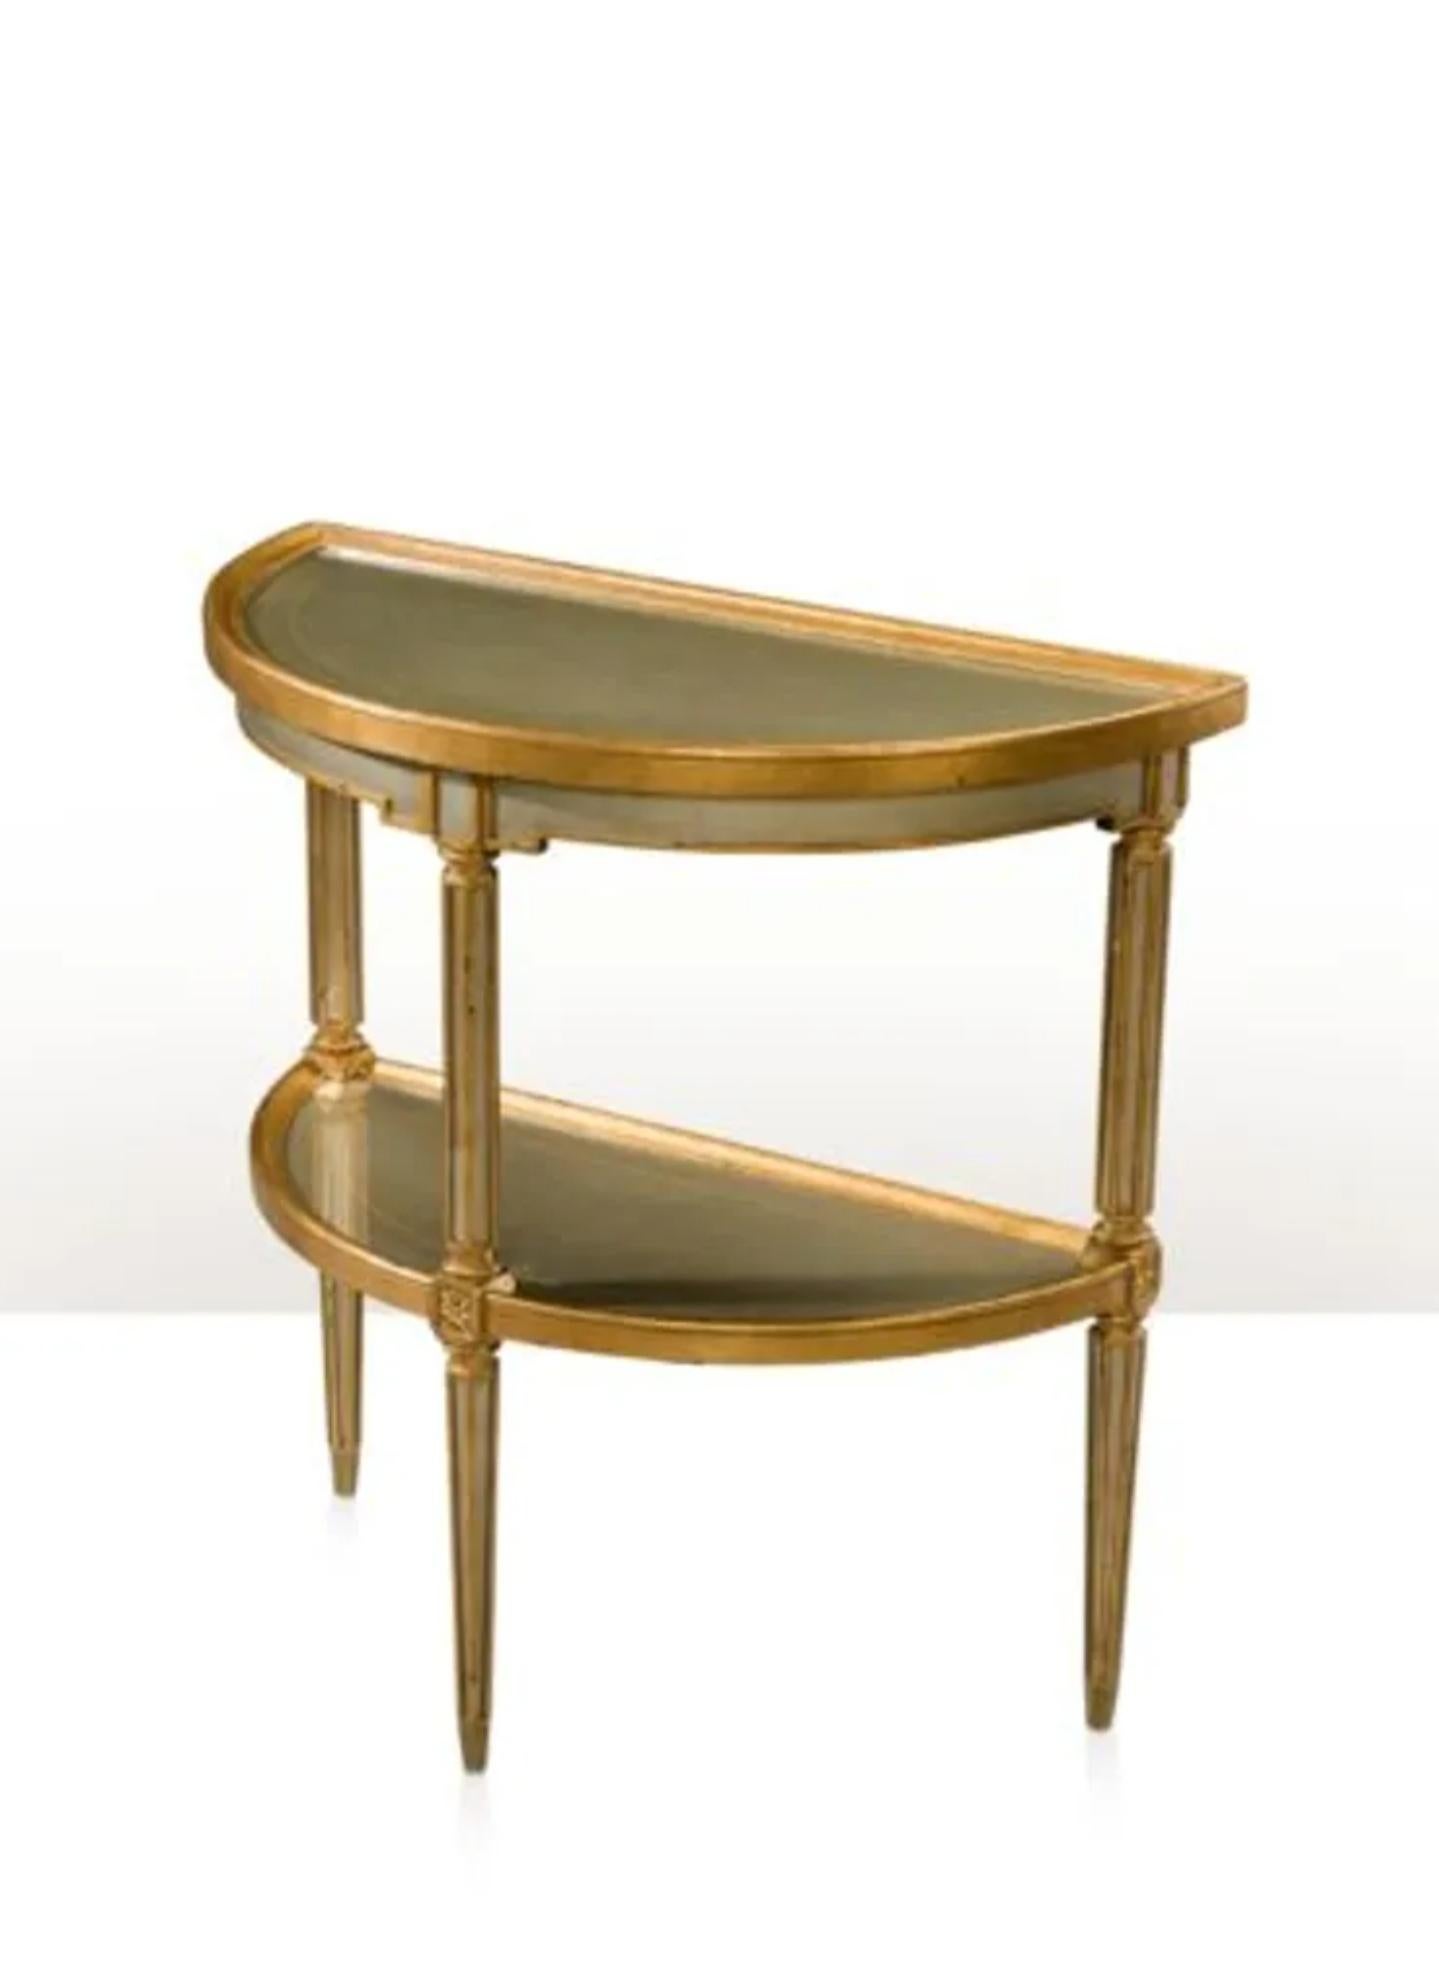 Theodore Alexander Venetian Waters Eglomise Demilune Console Table For Sale 6